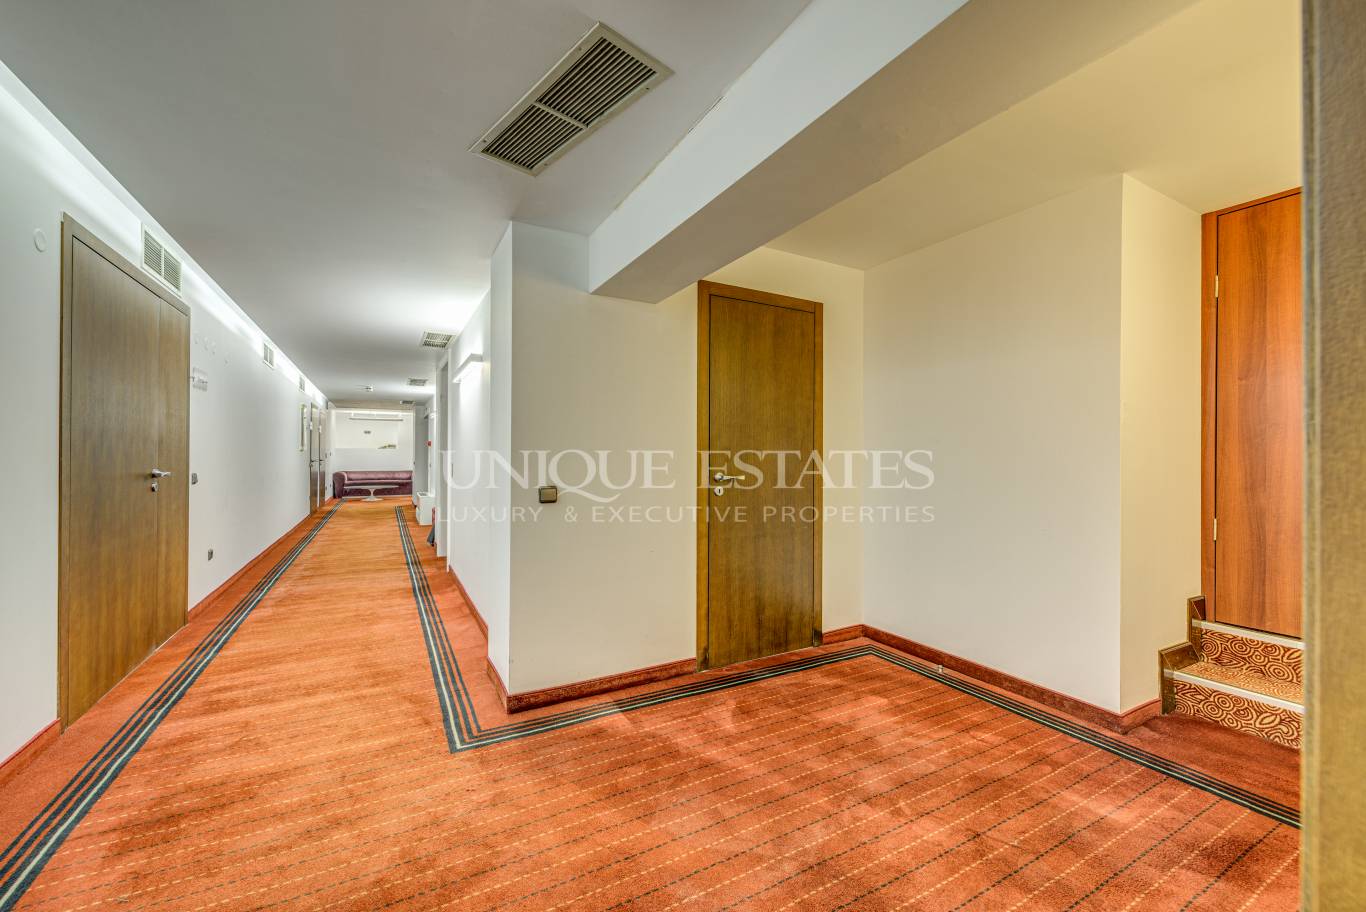 Office for rent in Sofia, Downtown with listing ID: K13585 - image 1